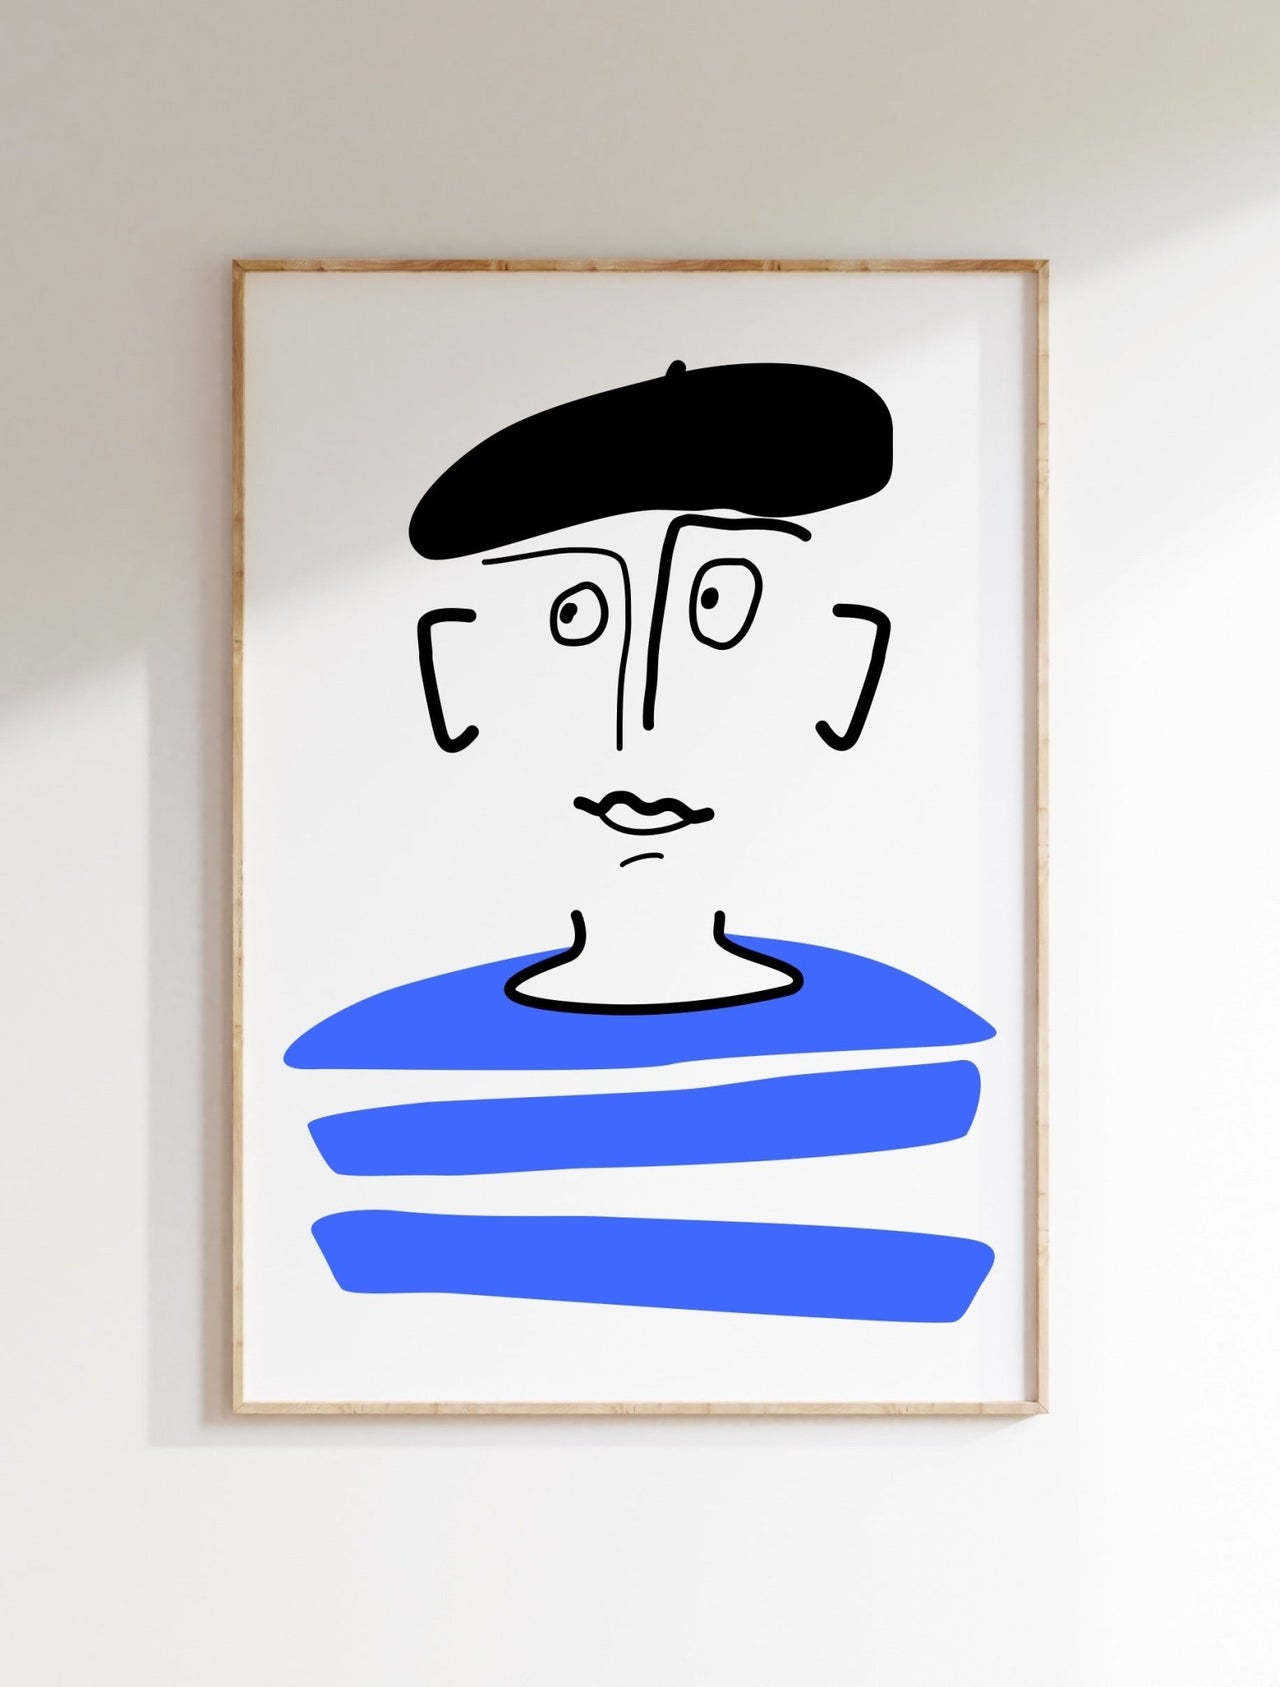 FRENCH MAN ILLUSTRATION GRAPHIC ART PRINT WITH A PLAIN BACKGROUND